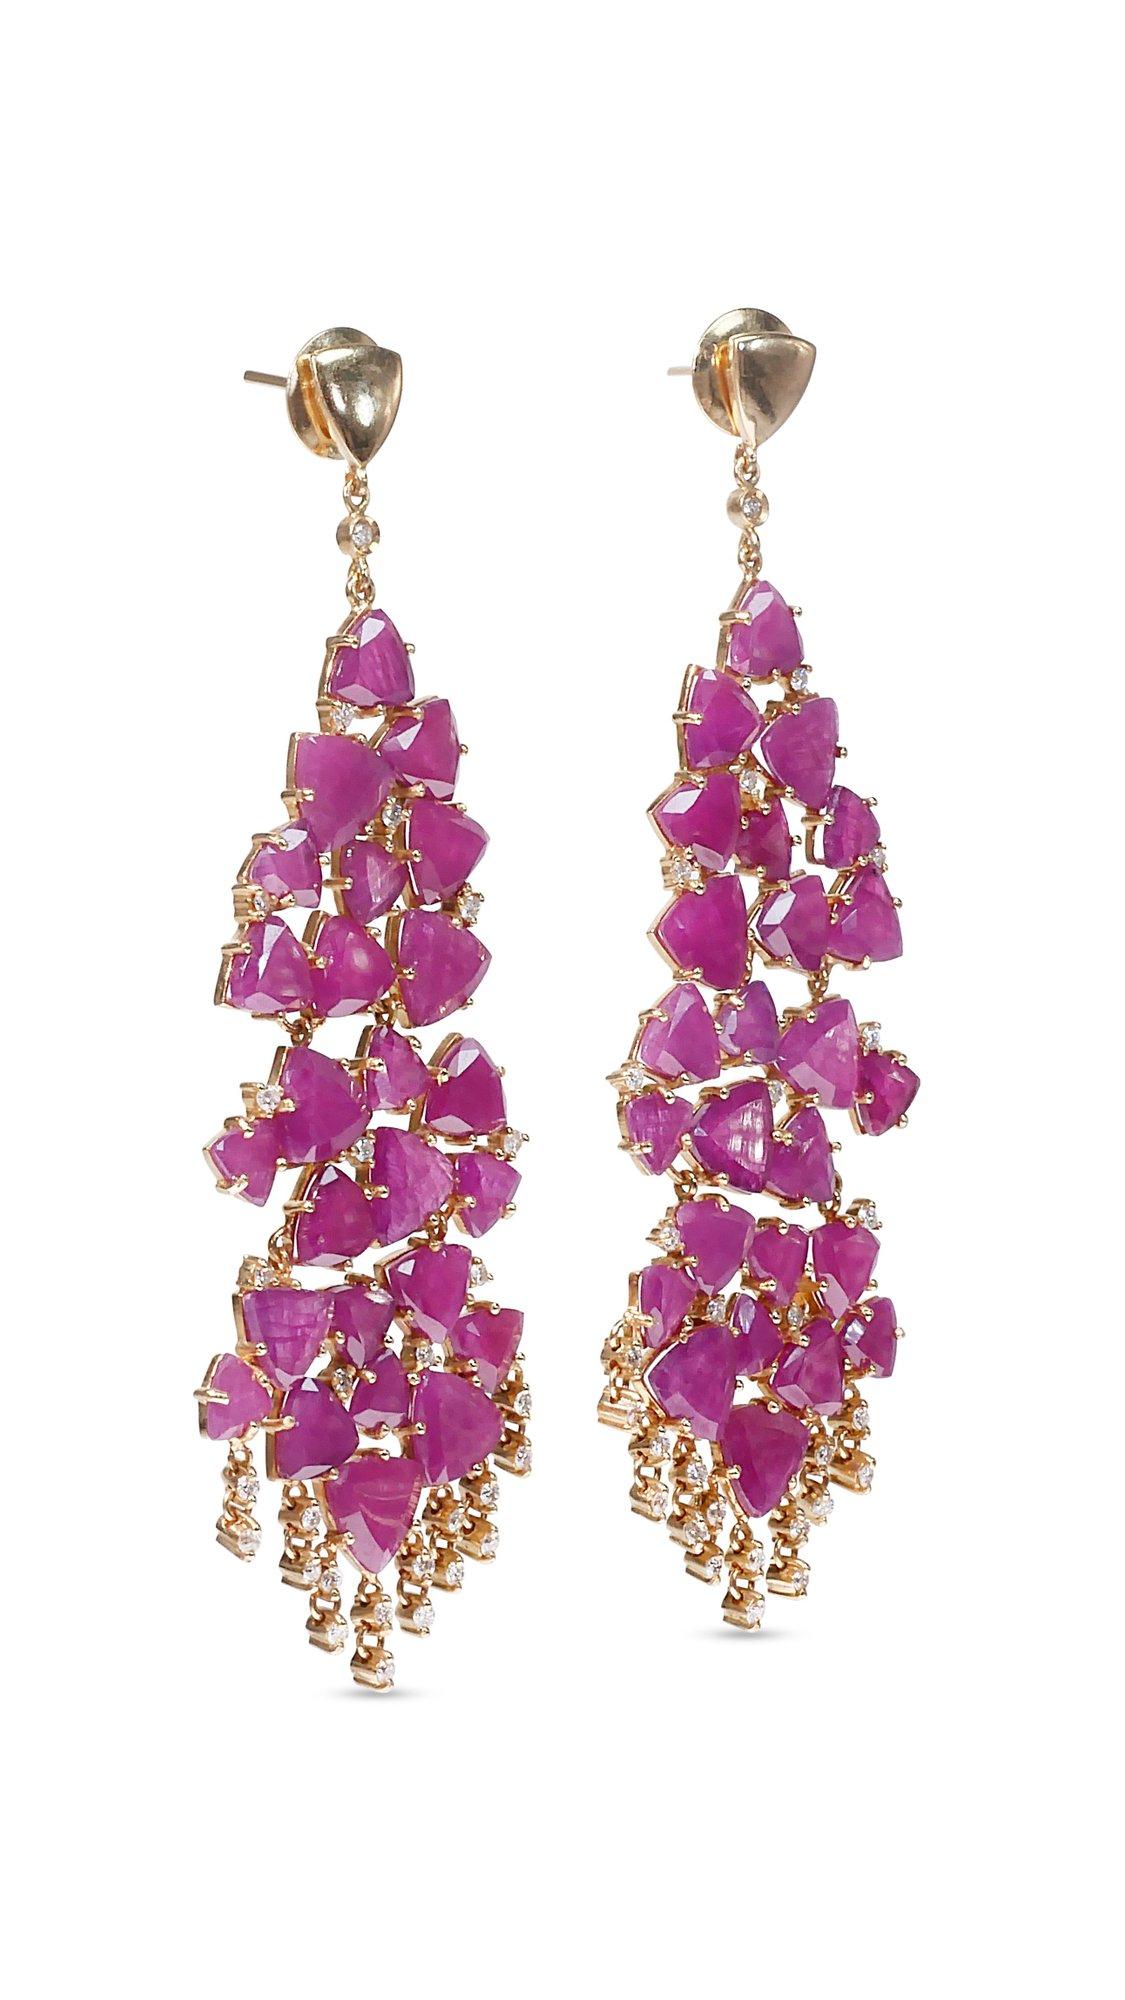 A luxurious earrings with 50 dazzling 33.80 carat natural rubies and 53 elegant 0.47 carat round brilliant side diamonds which add more to its elegance. The jewelry is made of 18K yellow gold with a high-quality polish. It comes with an AIG